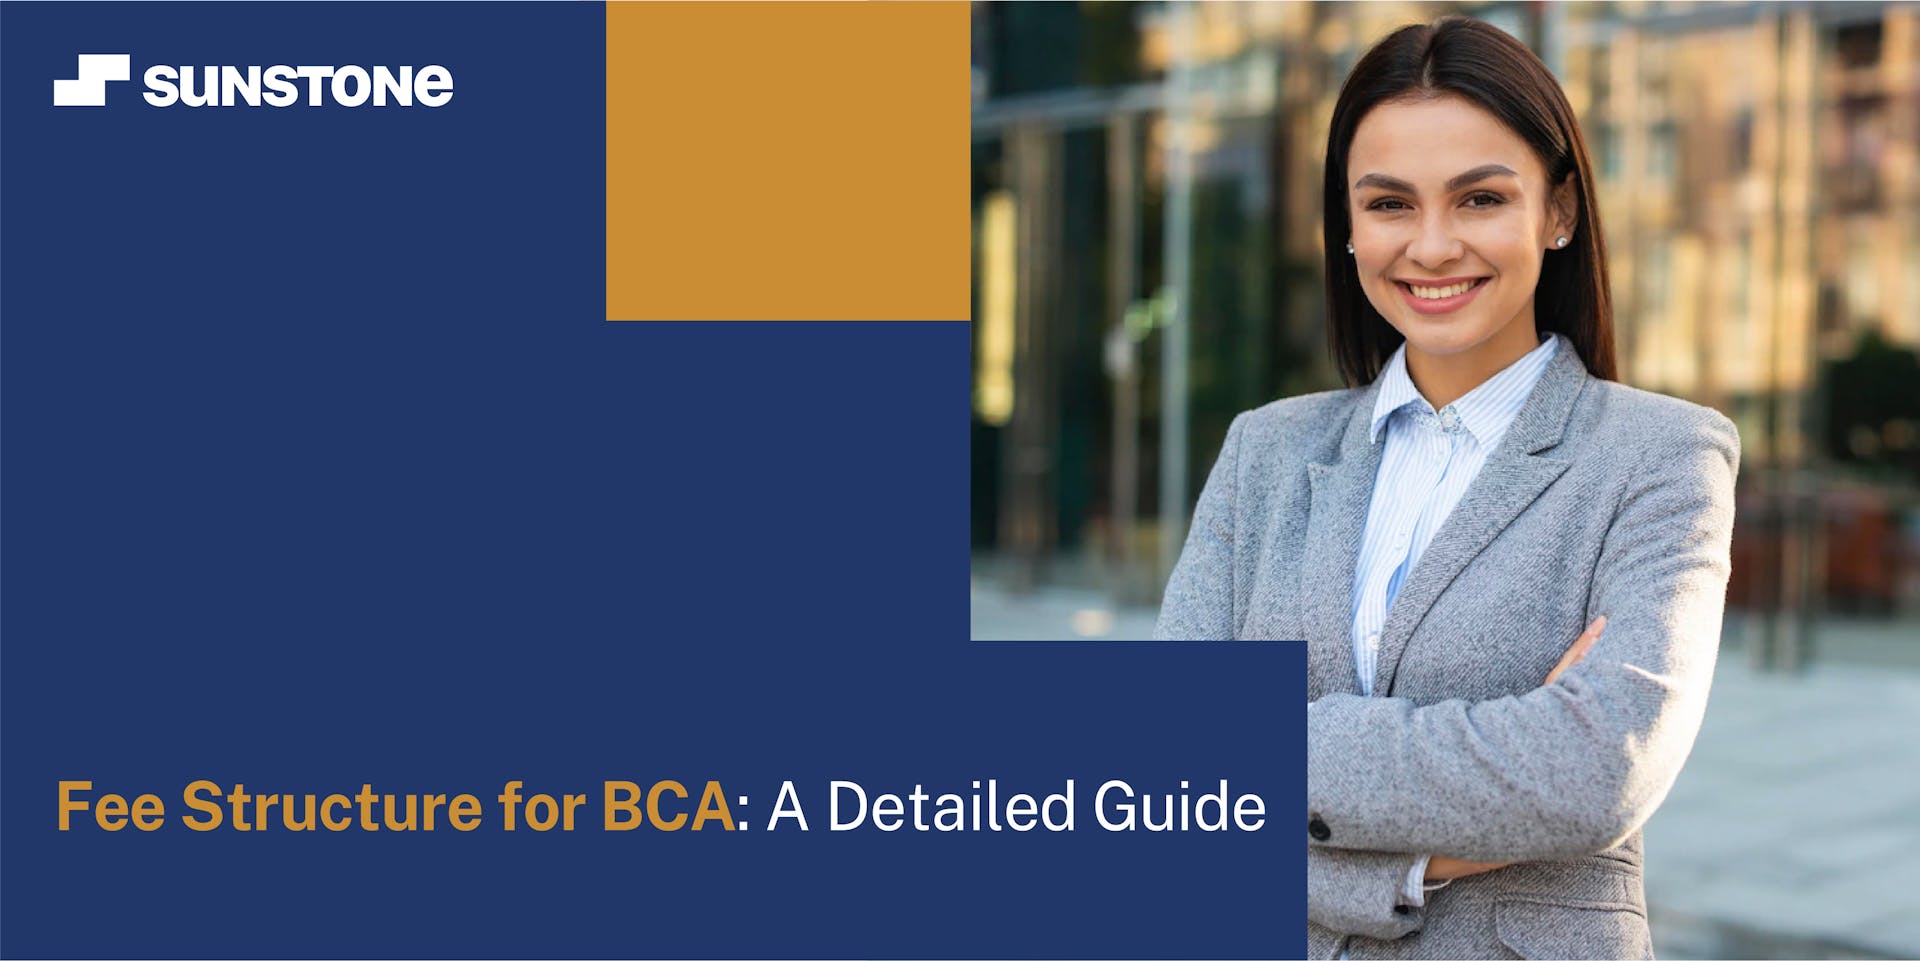 Fee Structure for BCA: A Detailed Guide